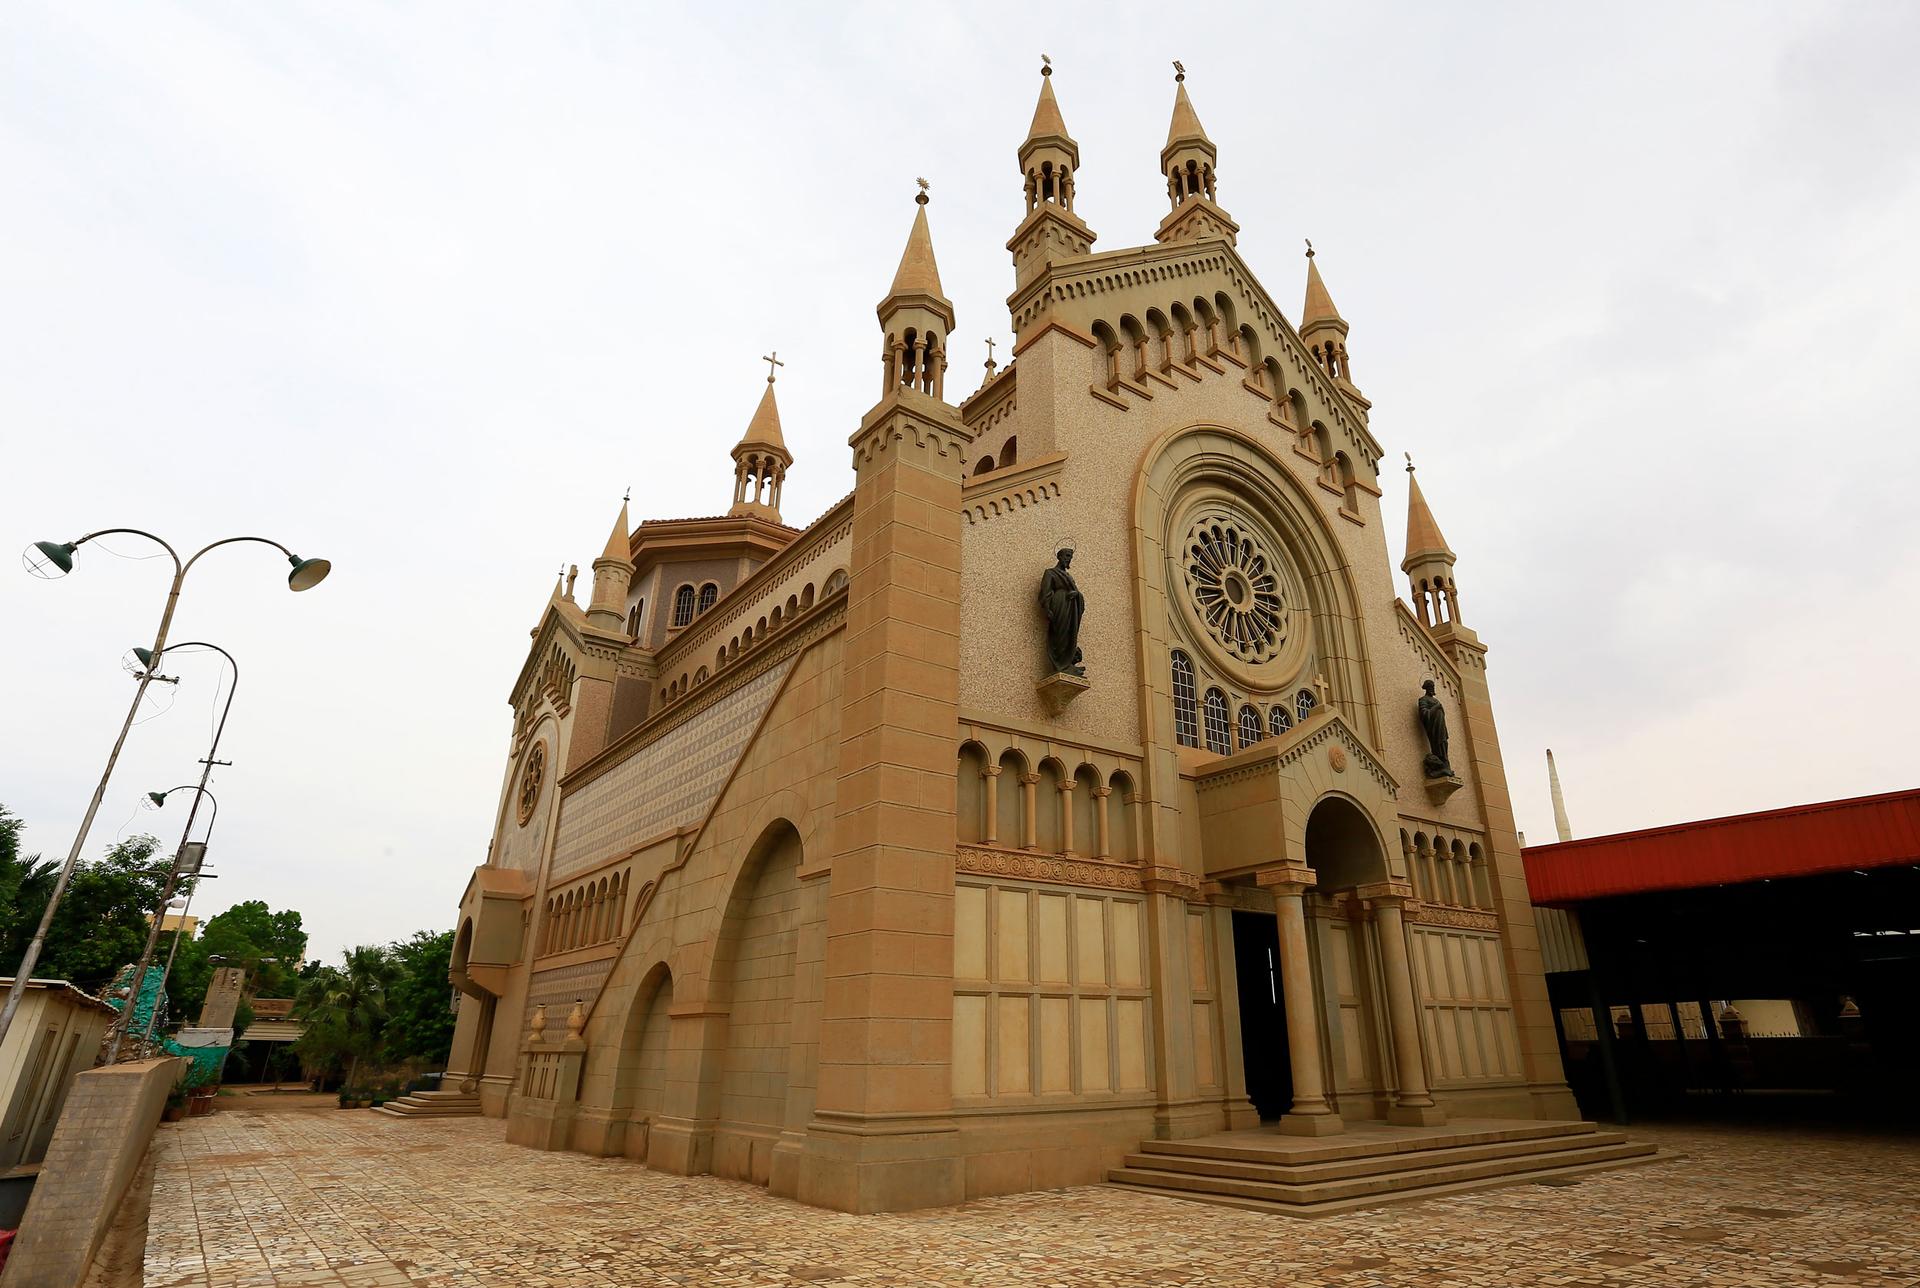 St. Matthew’s Catholic Cathedral in Khartoum, Sudan, is shown with tan-colored facade